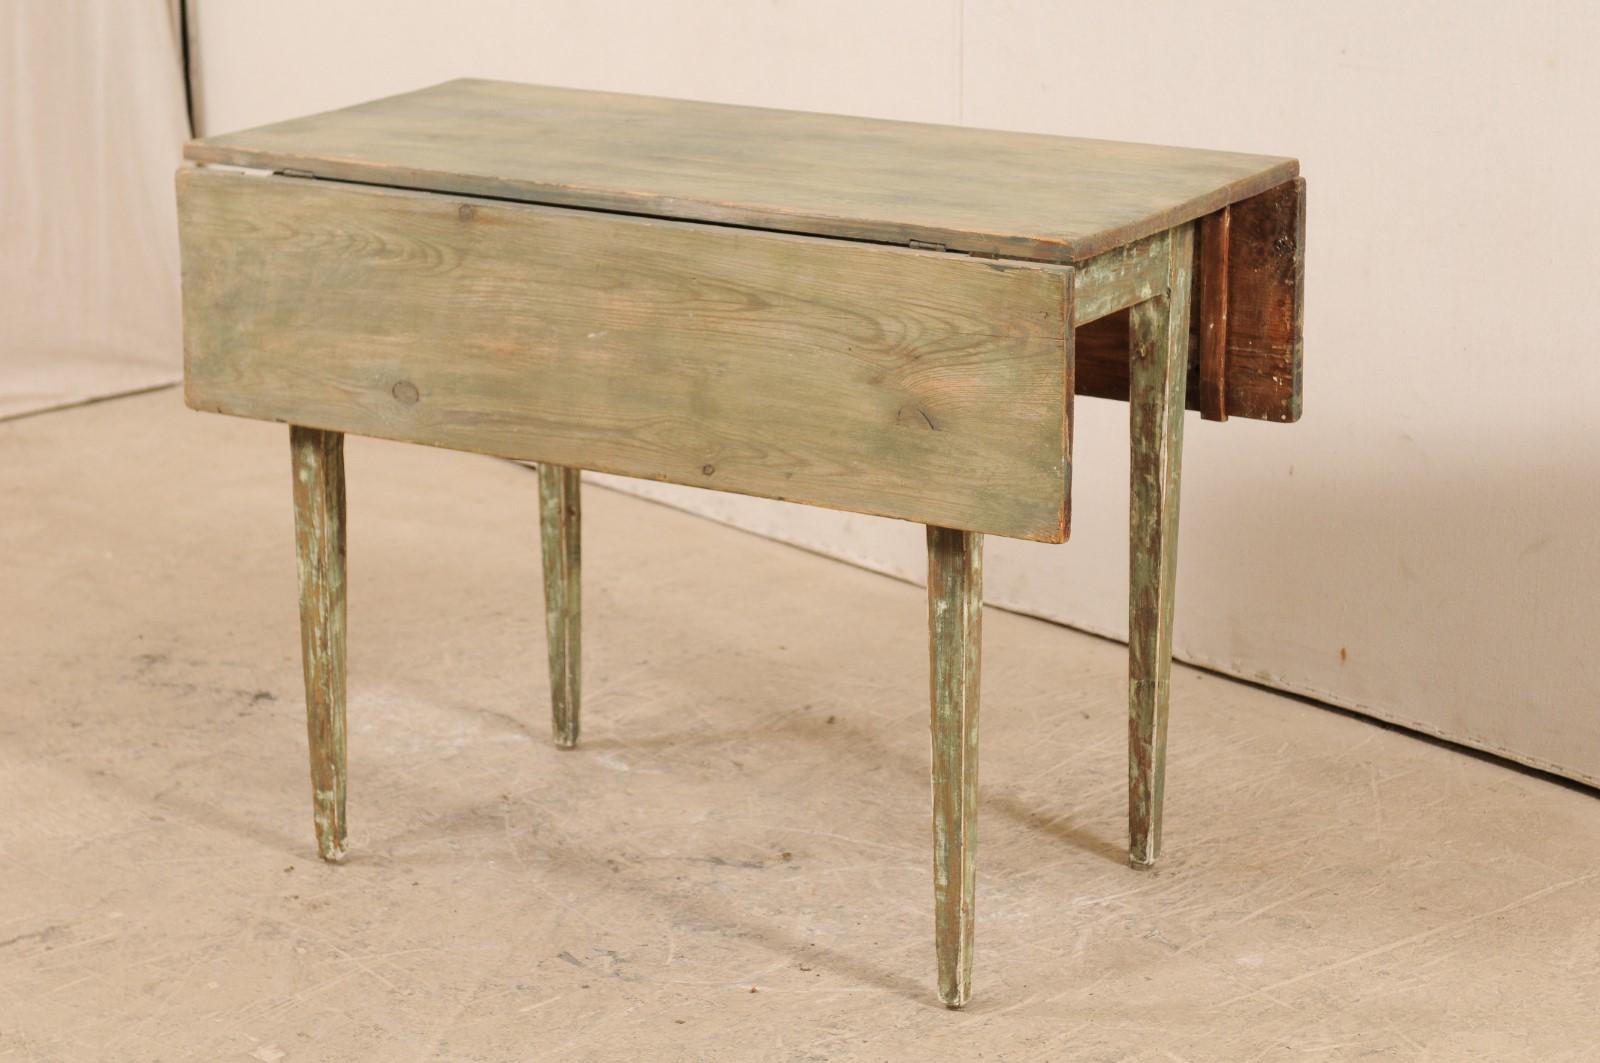 A 19th century Swedish drop-leaf wood table with original paint. This antique table from Sweden has a double drop-leaf sides, making this a very versatile piece, depending on how you use the leaf arrangements. This table has simply, clean lines, a